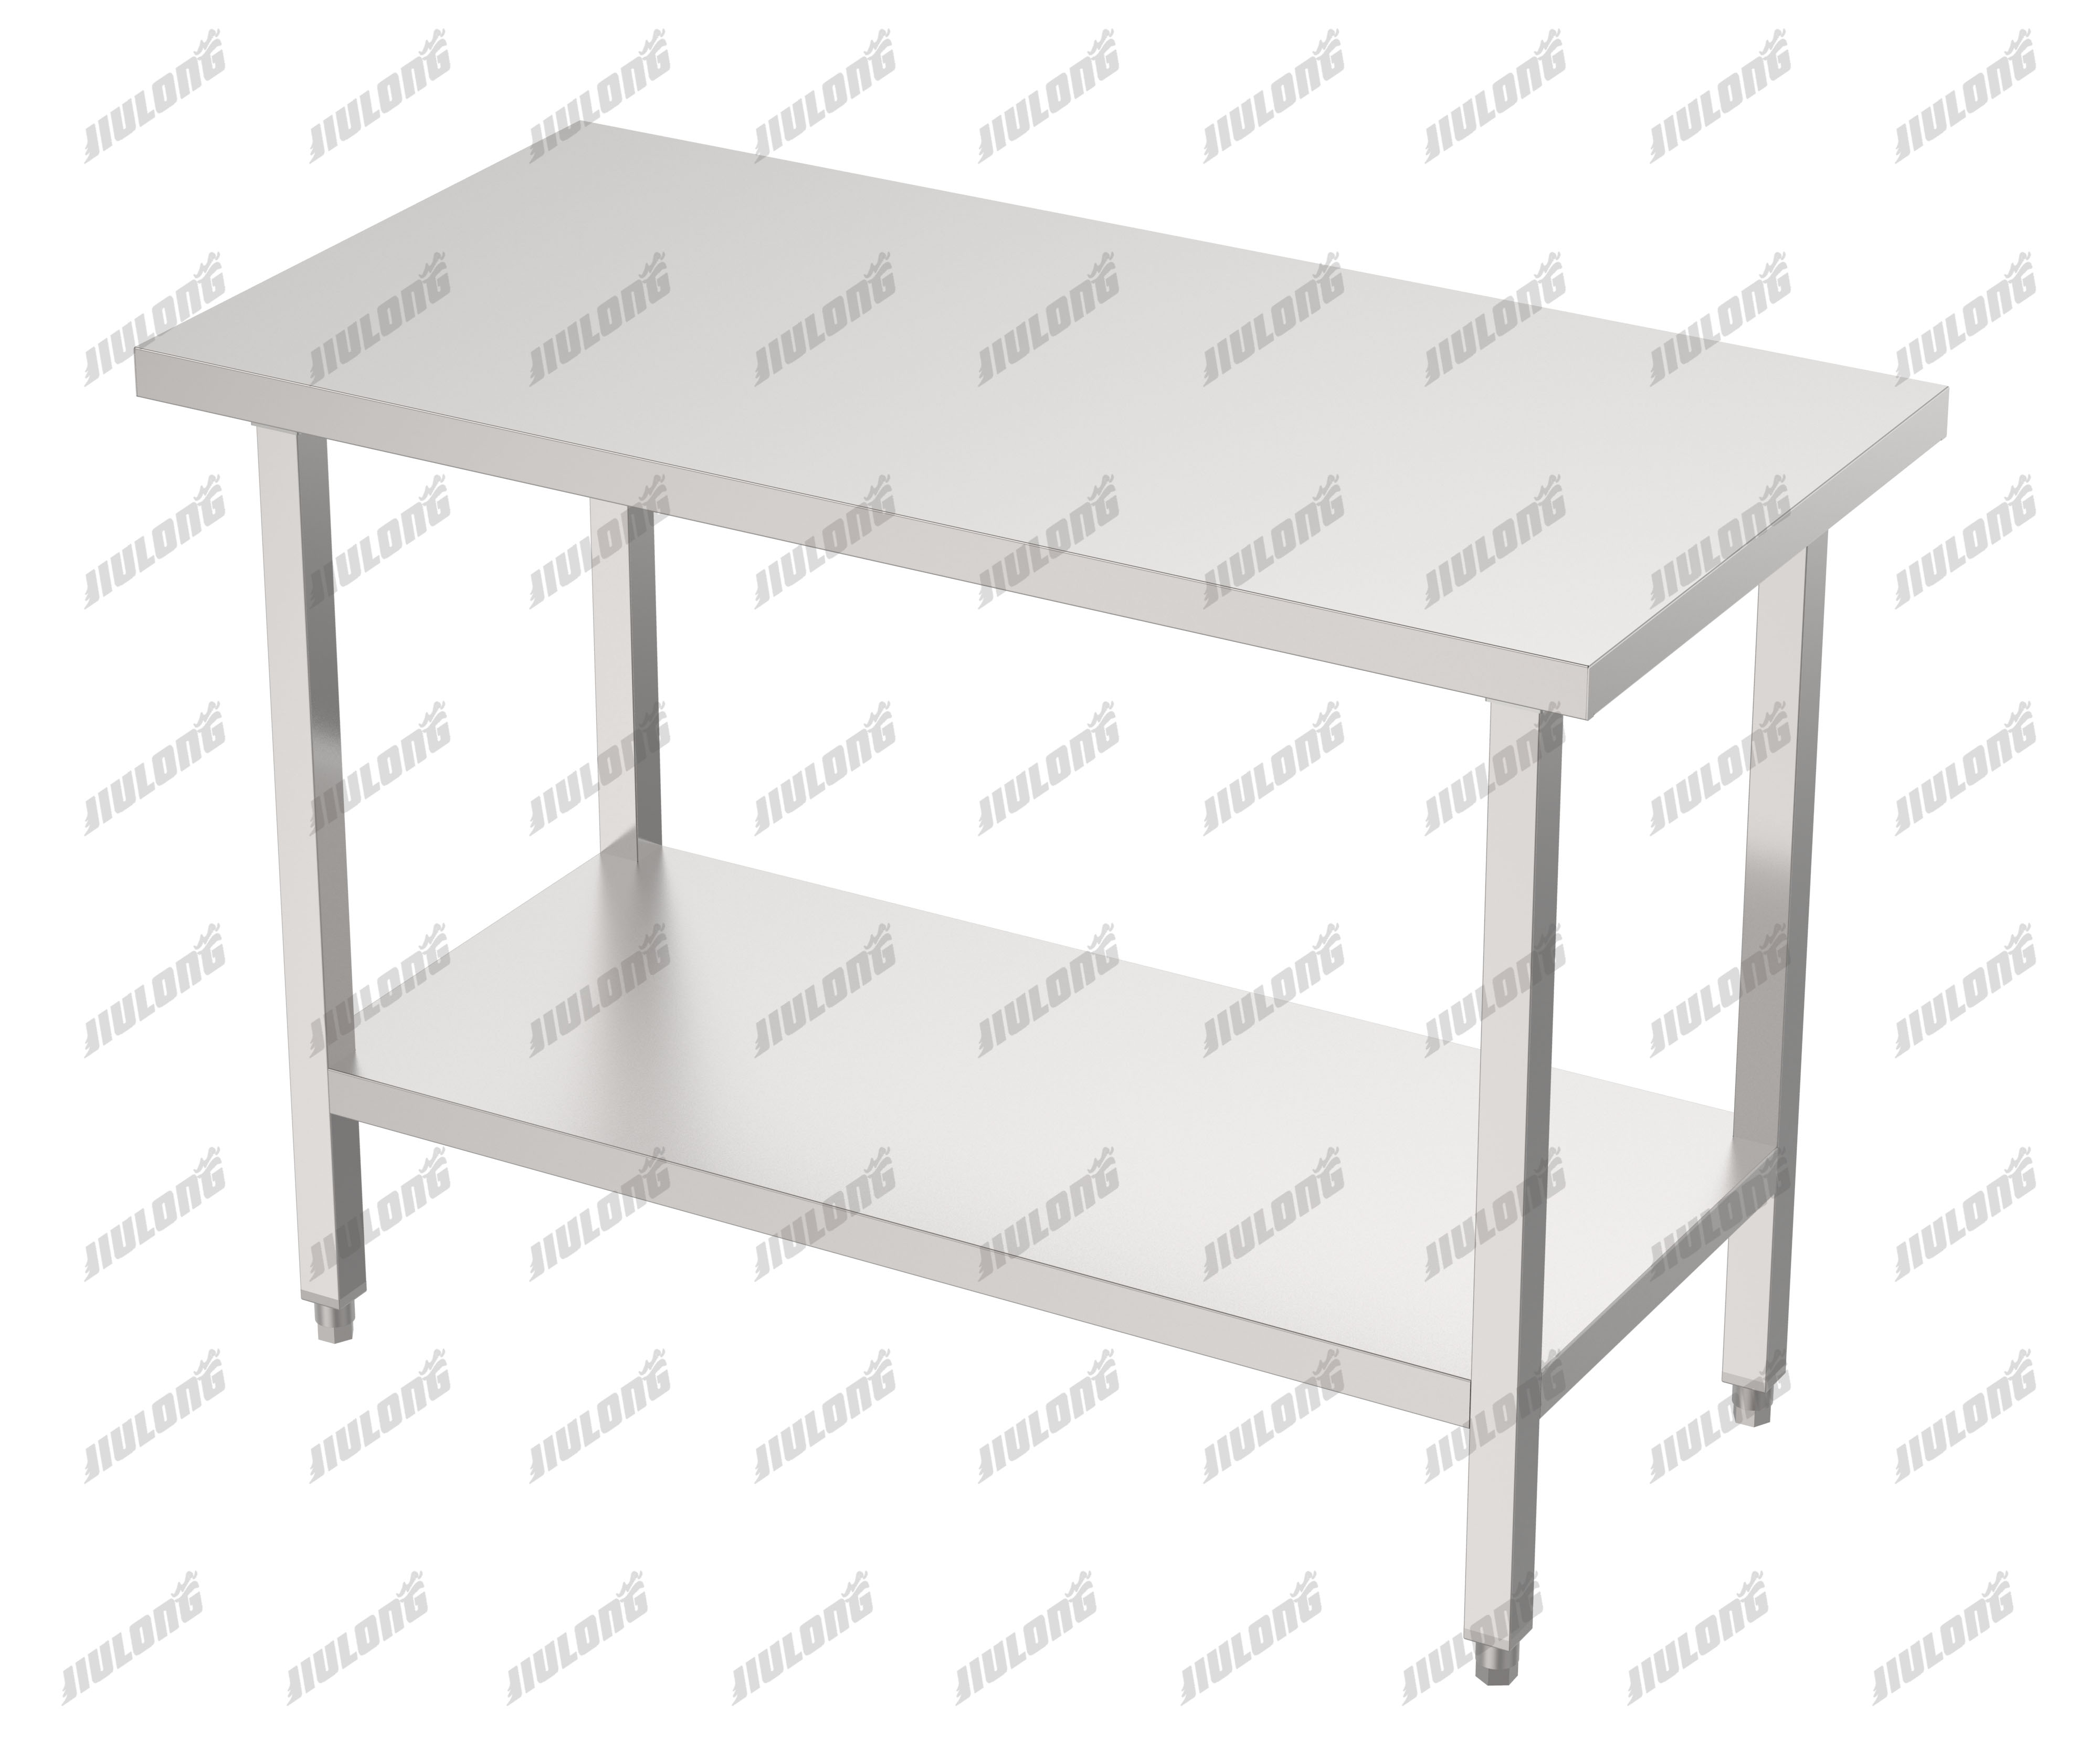 European Style Square Tube Legs Work Table with Flat Top